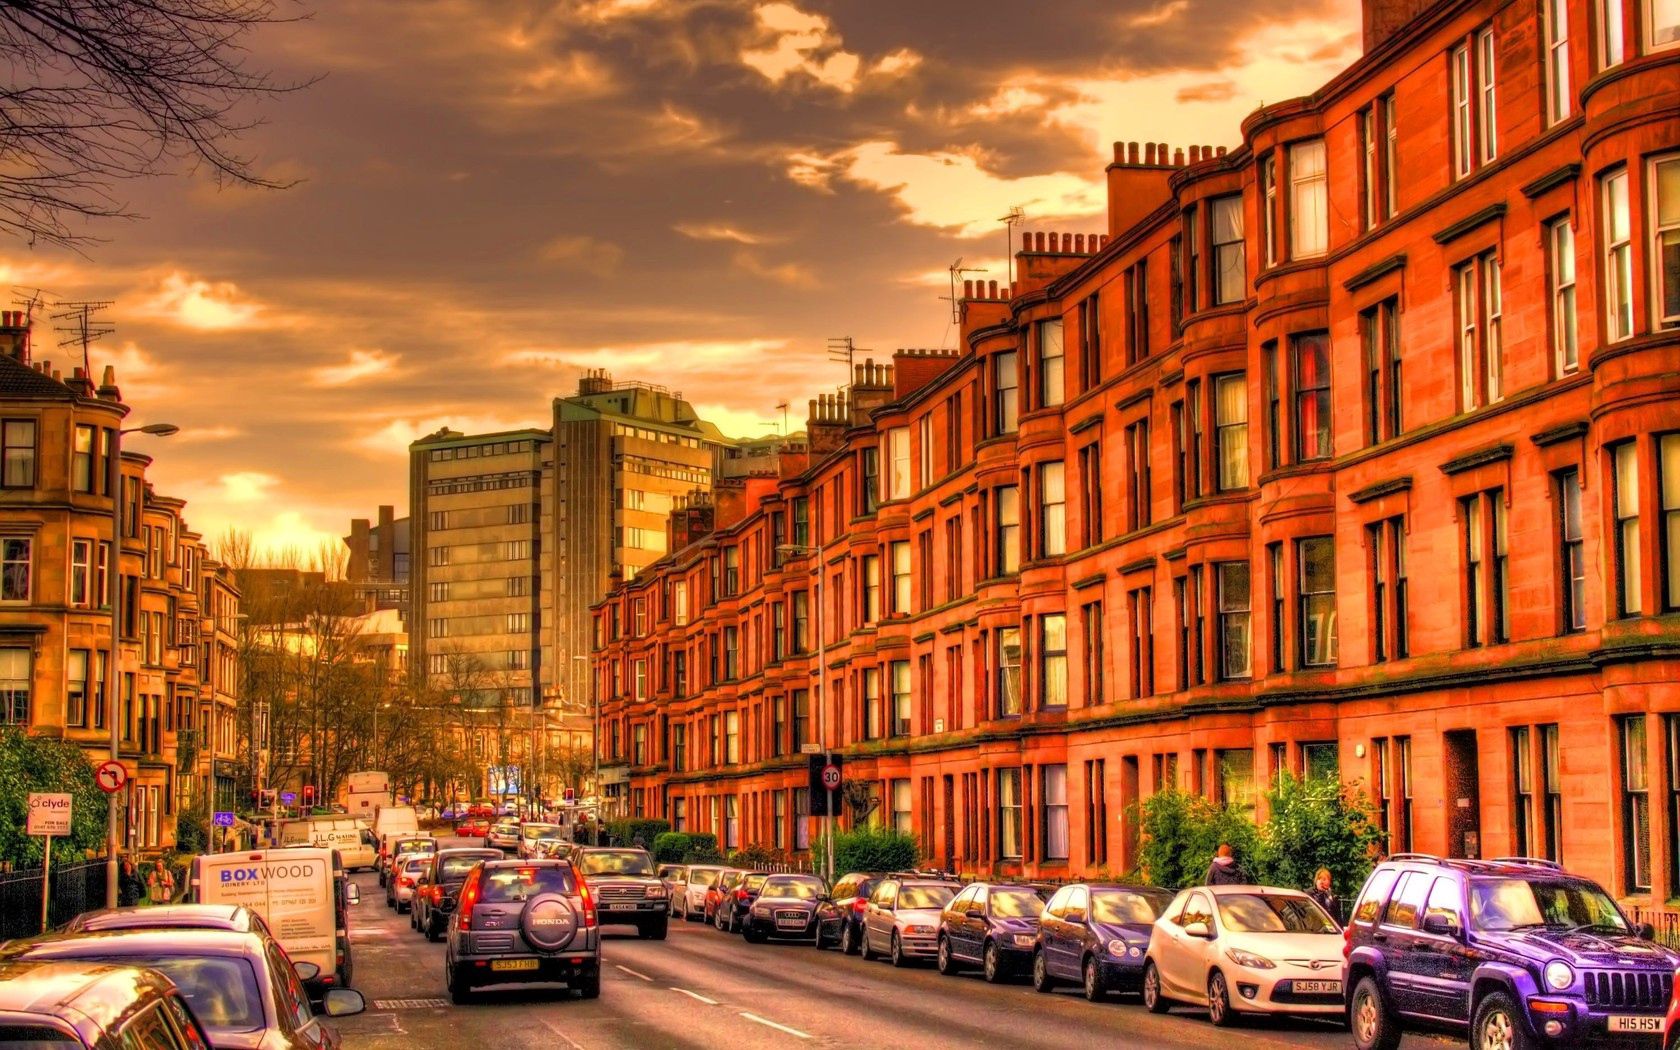 HD wallpaper city, cities, sky, cars, building, hdr, street